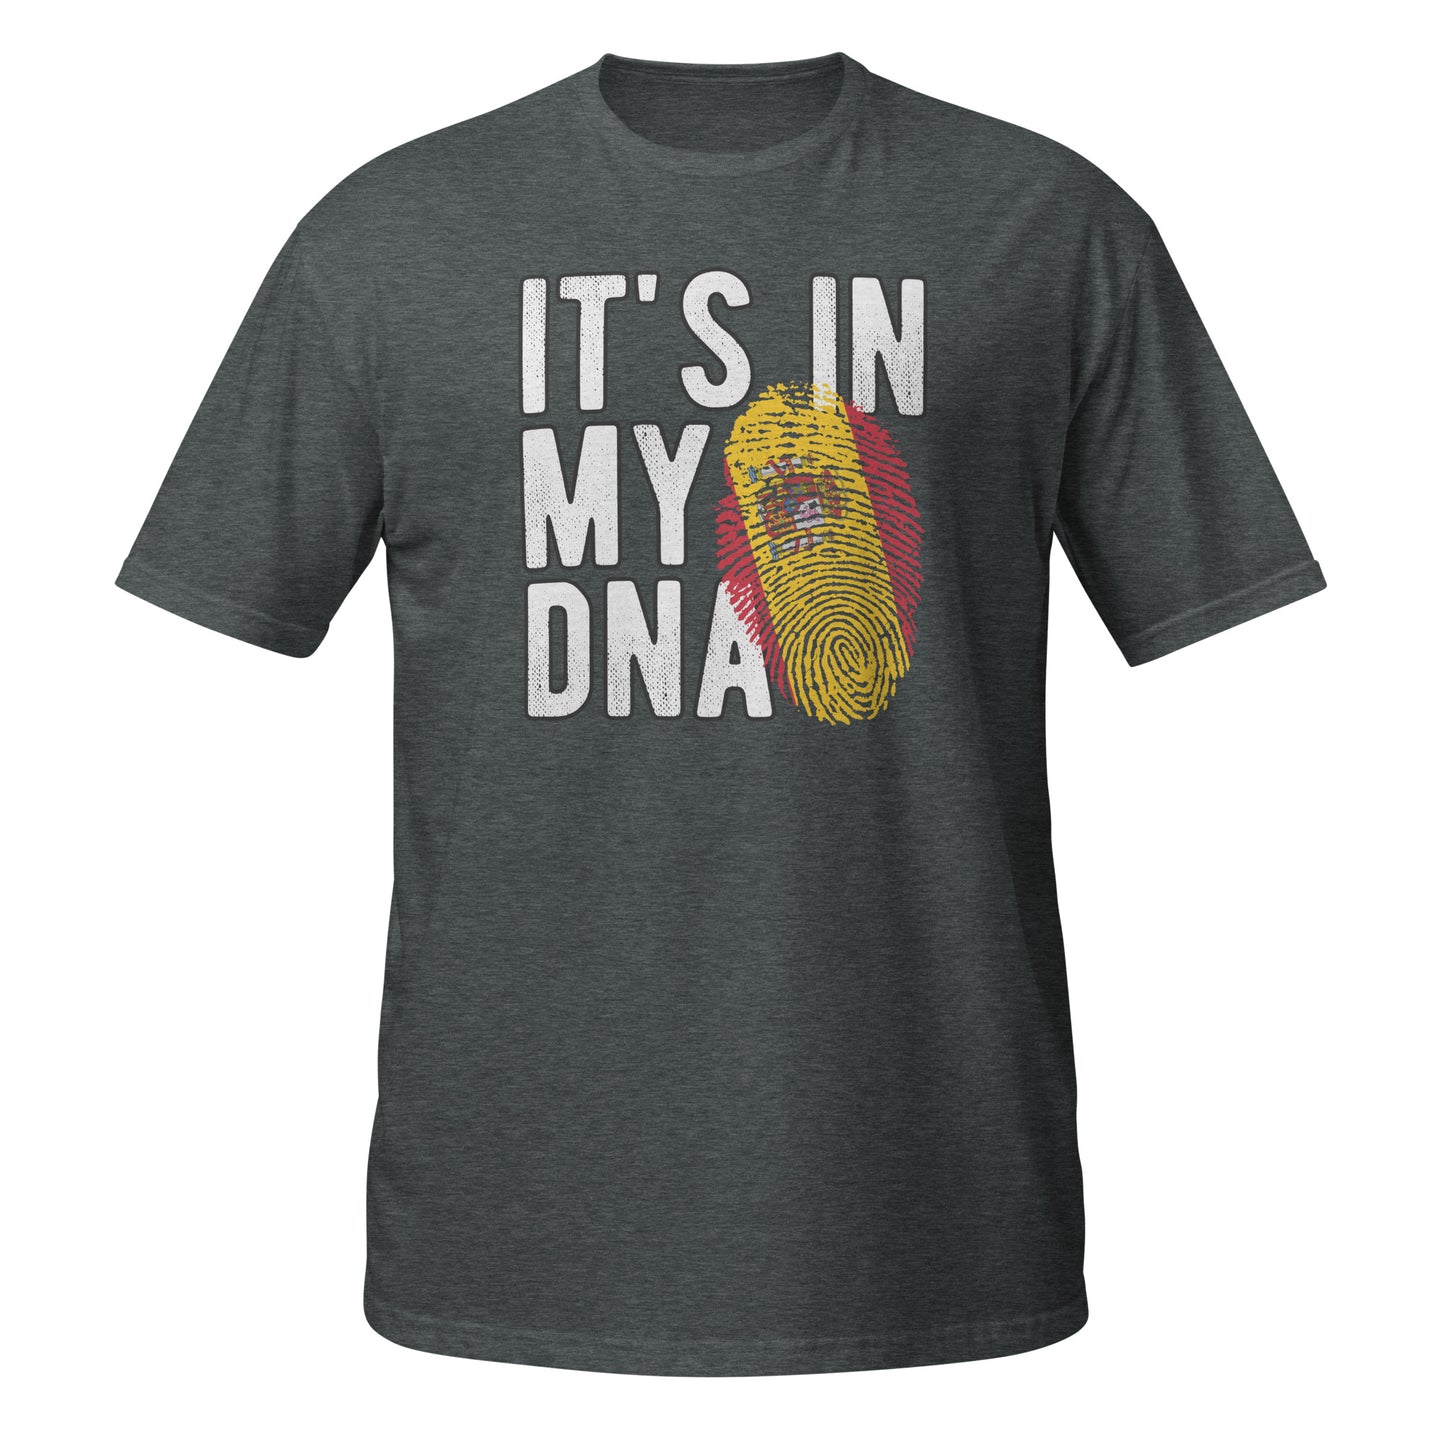 Spanish-inspired T-shirt: "It's in my DNA" design